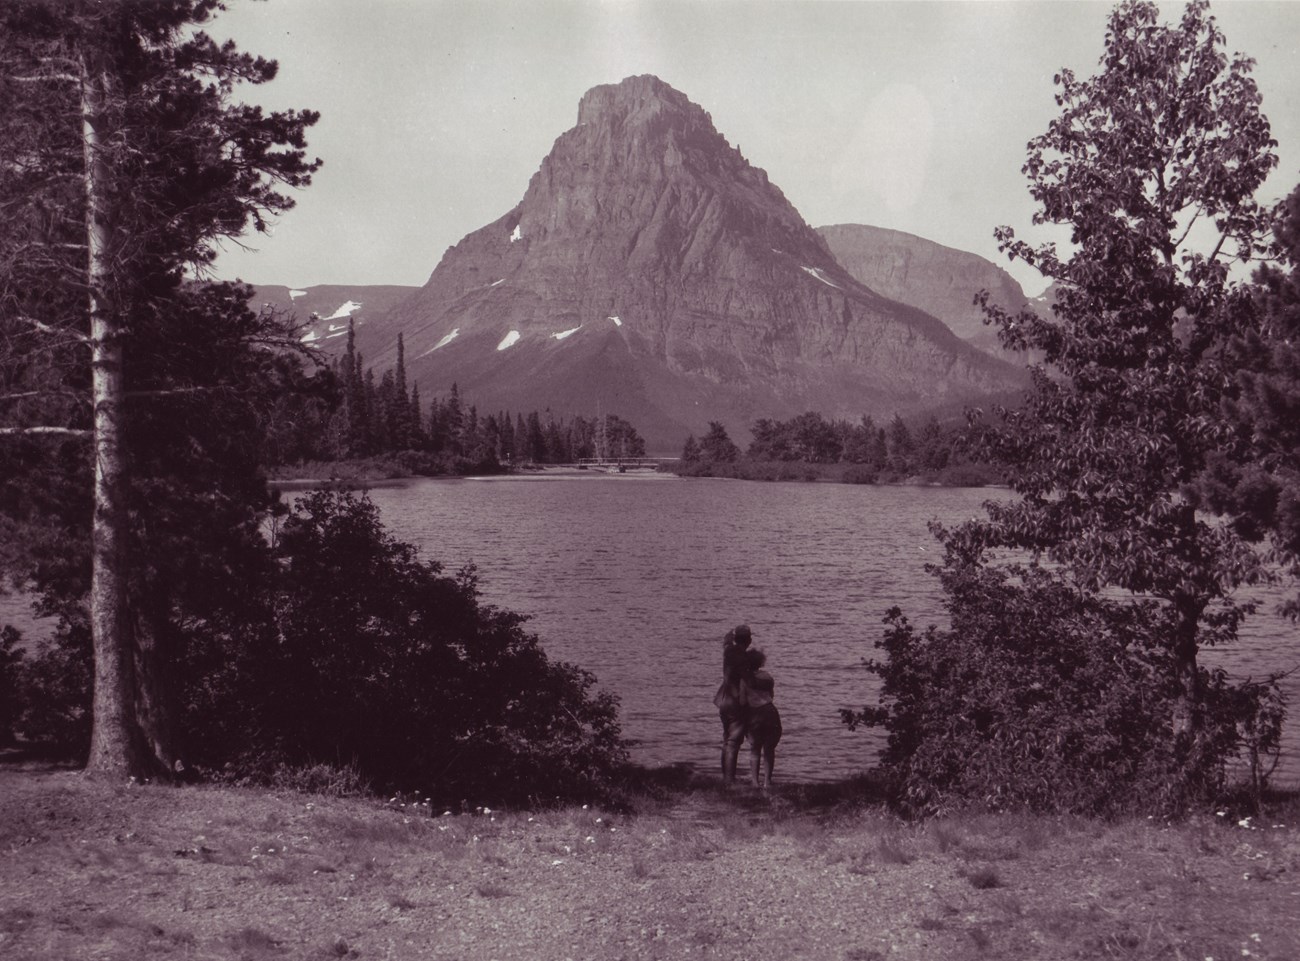 Black and white photo of a couple on the edge of a lake looking towards a mountain.